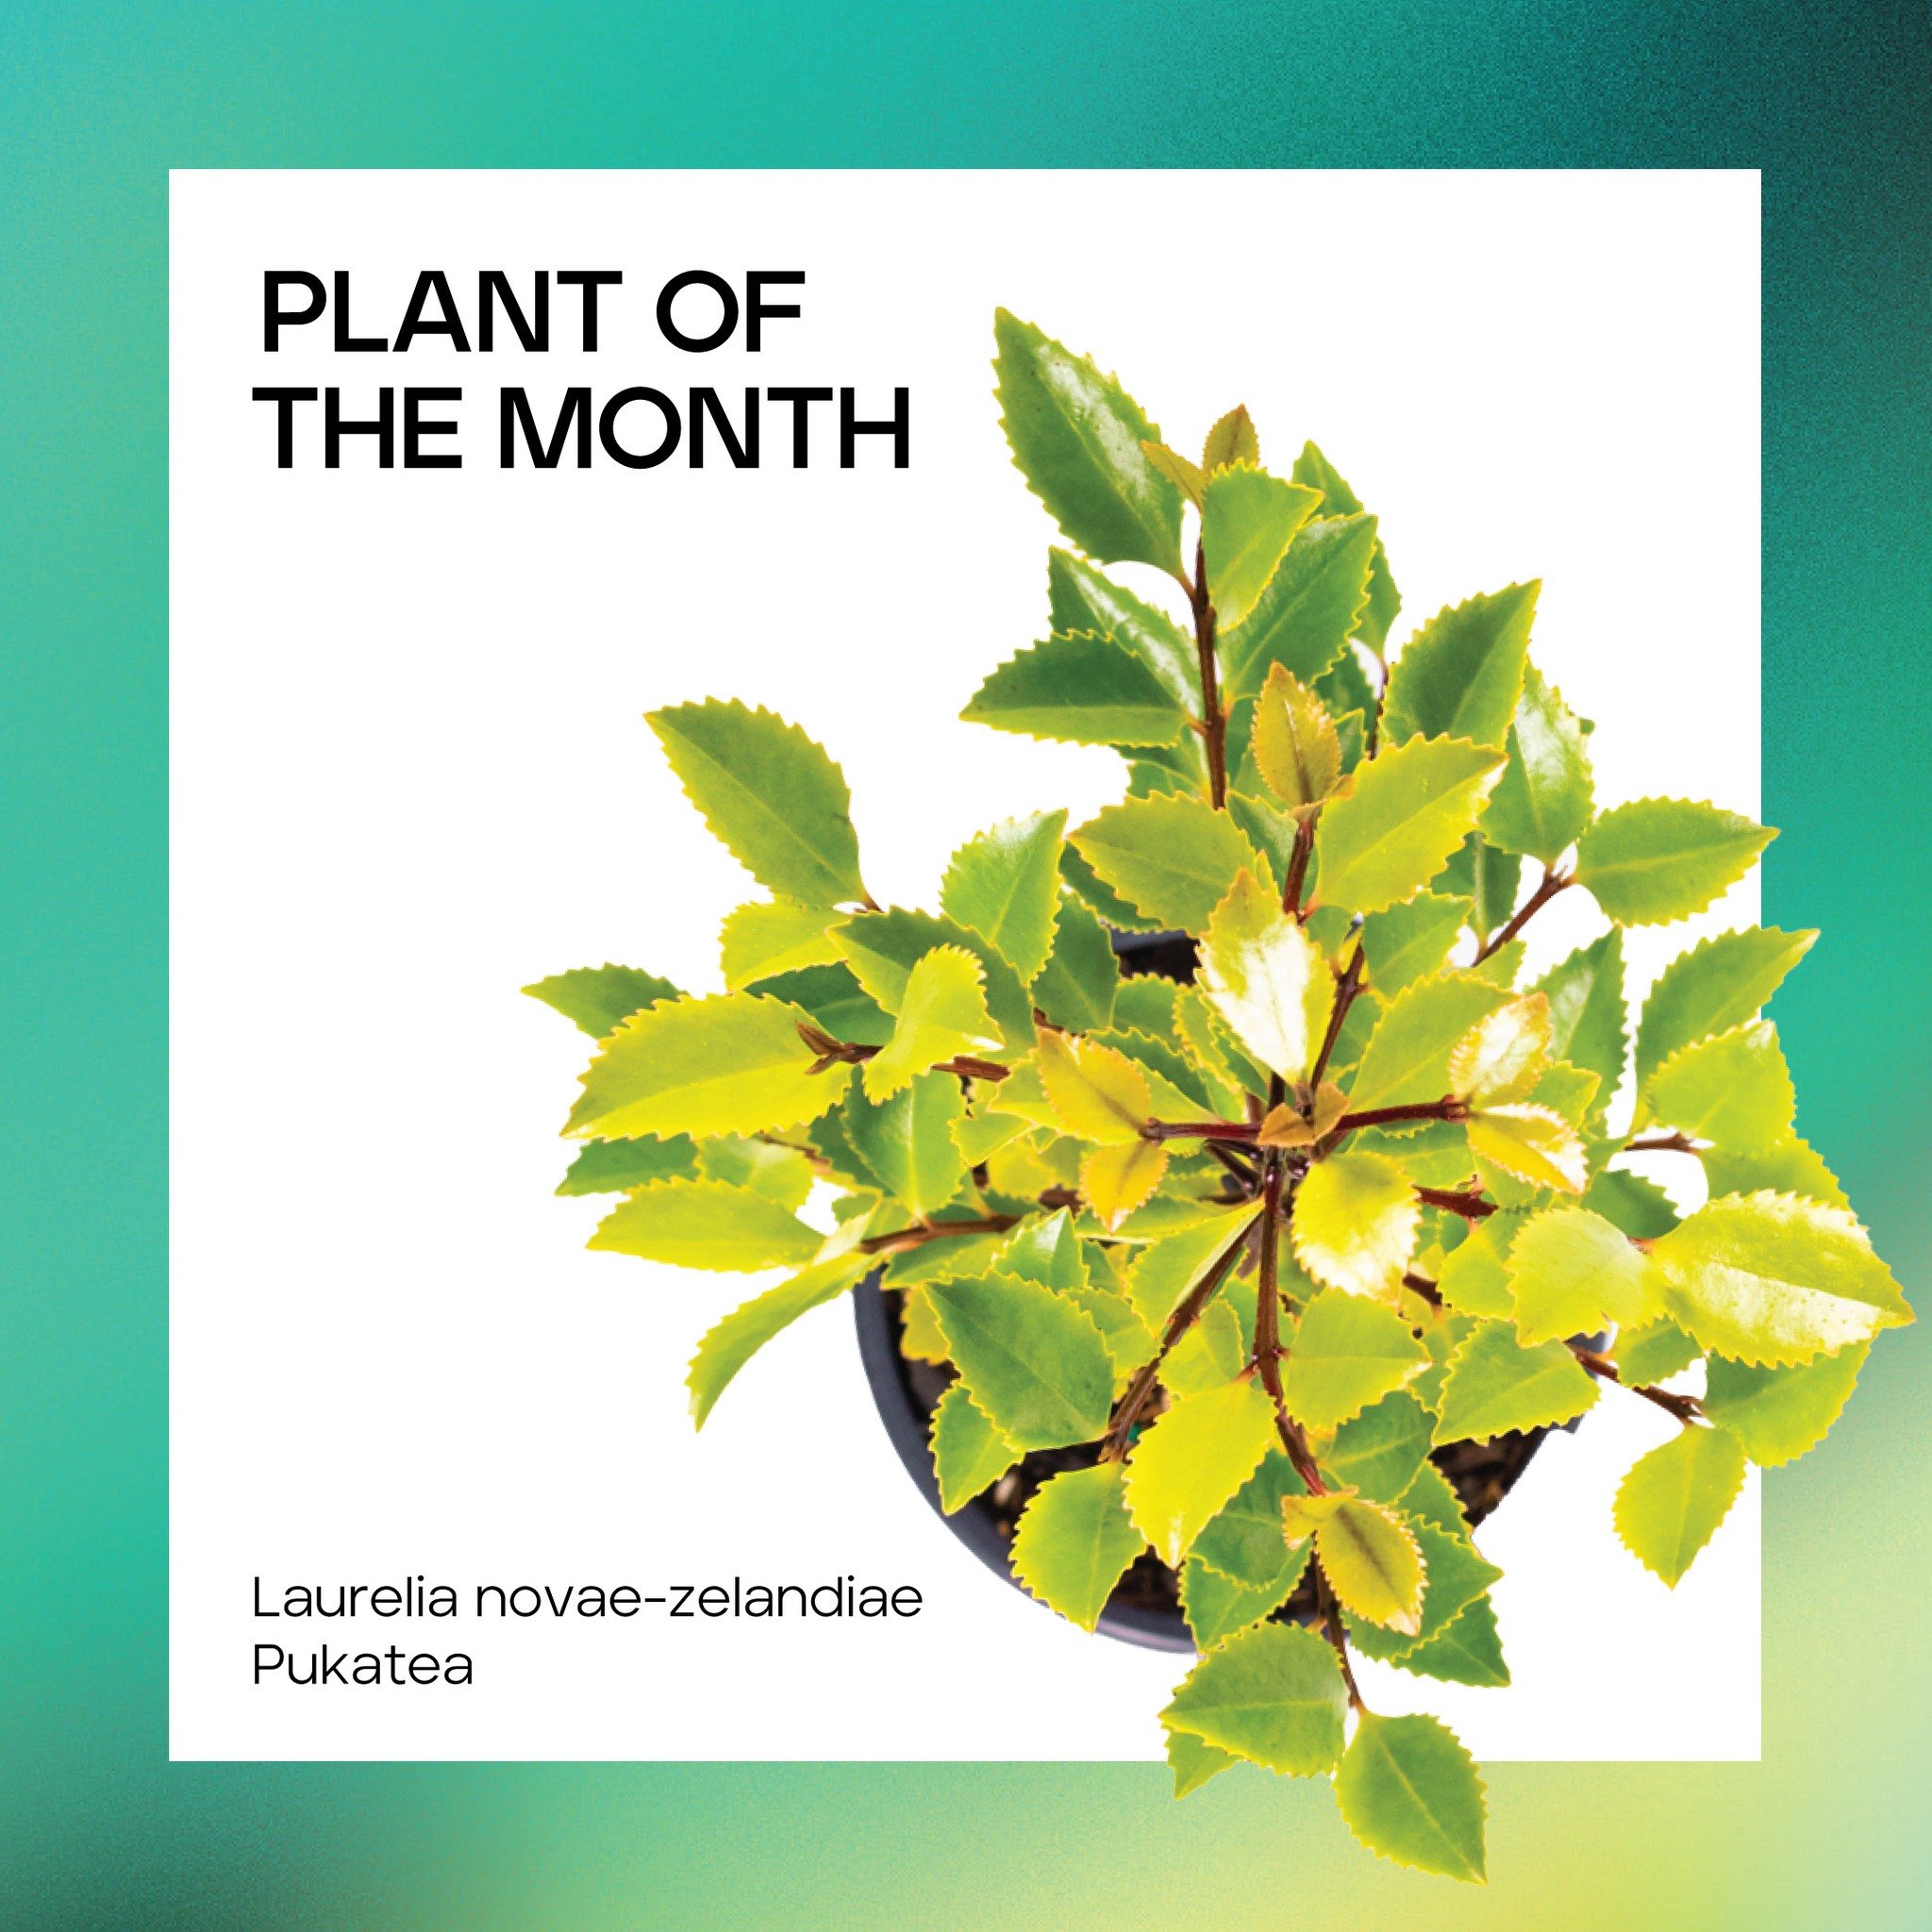 Our plant of the month is Laurelia novae-zelandiae, otherwise known as Pukatea. 

It&rsquo;s a large, buttress rooted native tree that loves moisture and thrives in swampy forests and gullies throughout the North Island and the west coast of the Sout